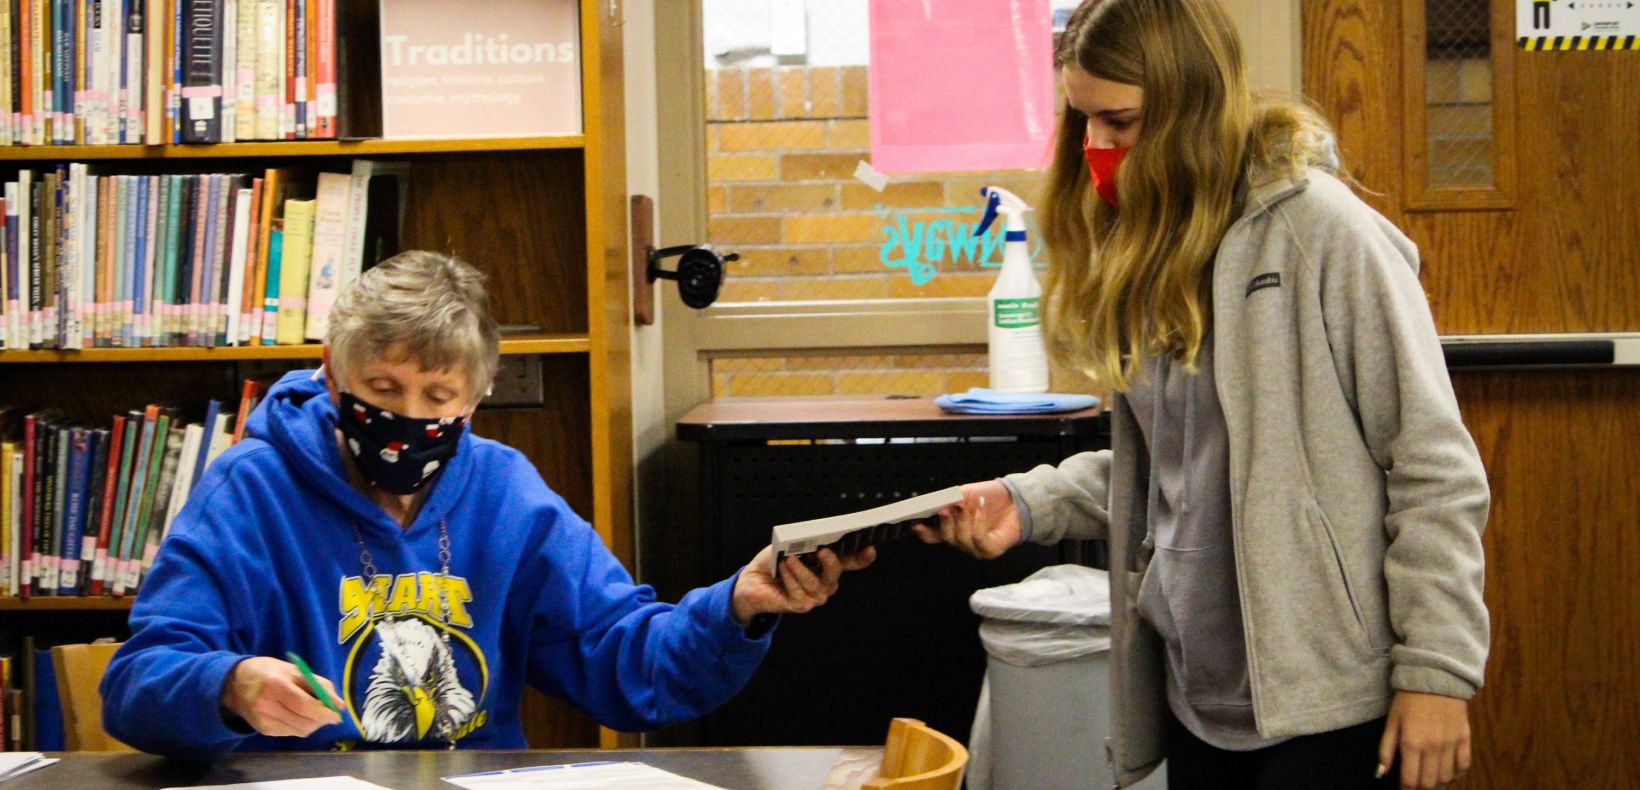 student handing a book to a clerk